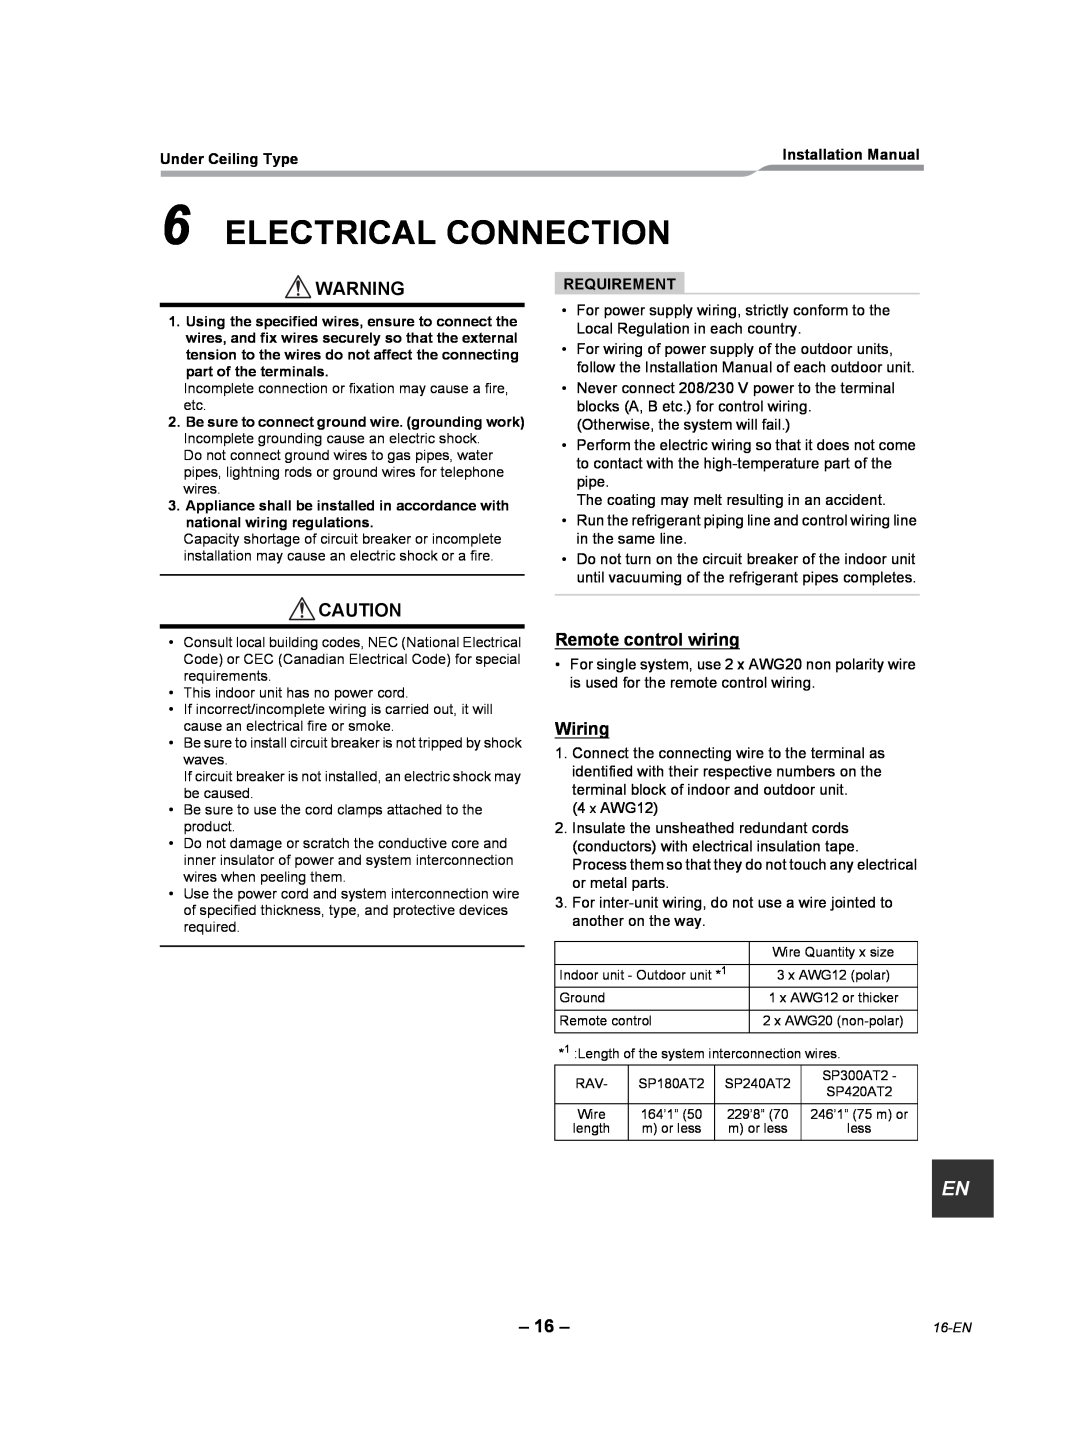 Toshiba RAV-SP180CT-UL Electrical Connection, Remote control wiring, Wiring, Under Ceiling Type, Requirement 